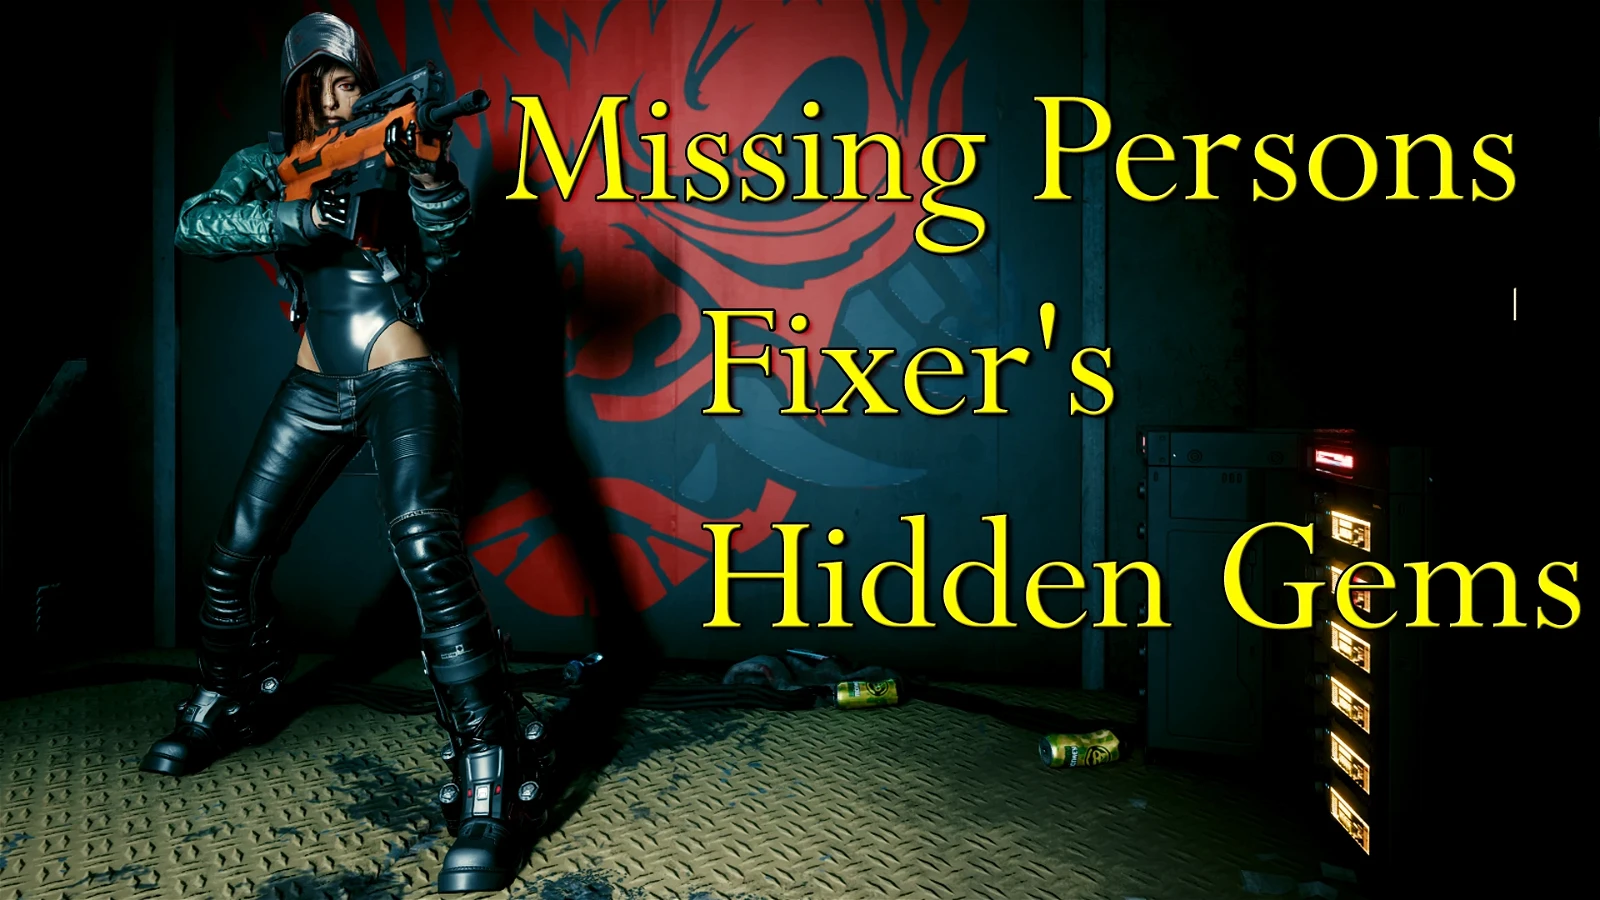 Cyberpunk 2077: Missing Persons - Fixer's Hidden Gems: Fan-made expansion adds over 190 quests.